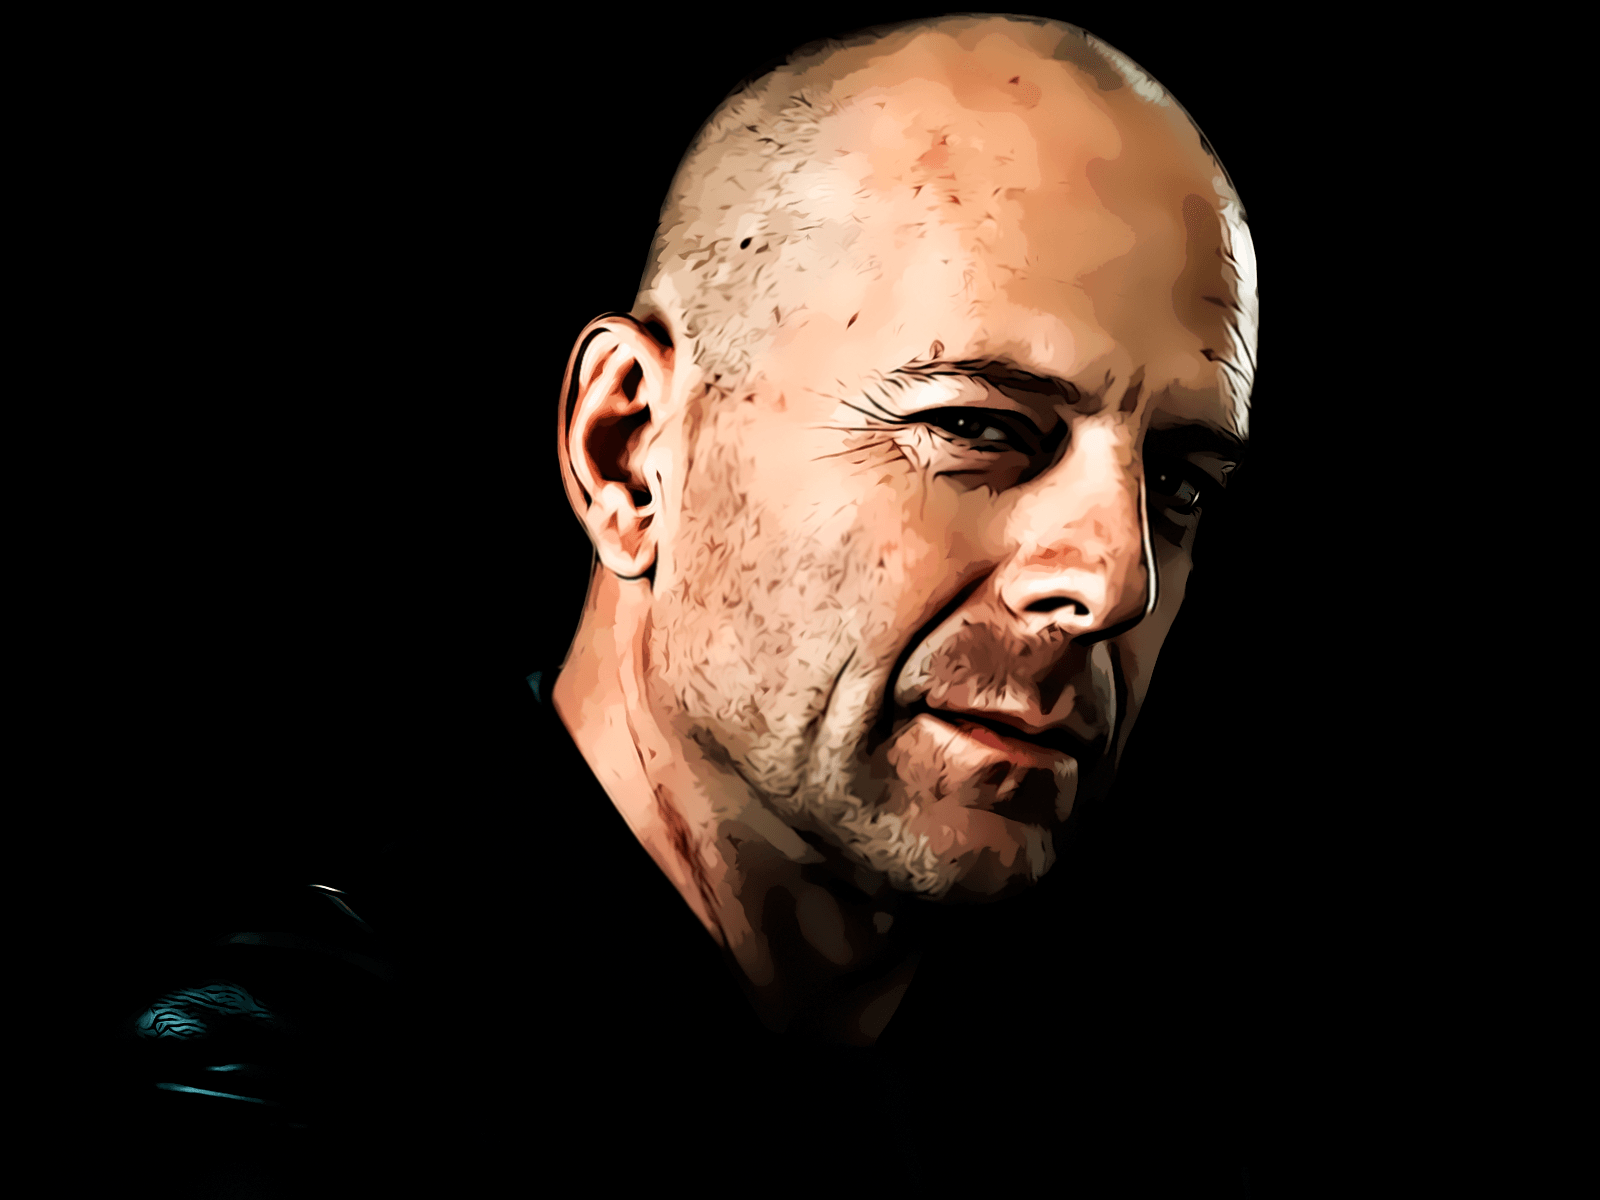 Bruce Willis Wallpapers and Background Images   stmednet